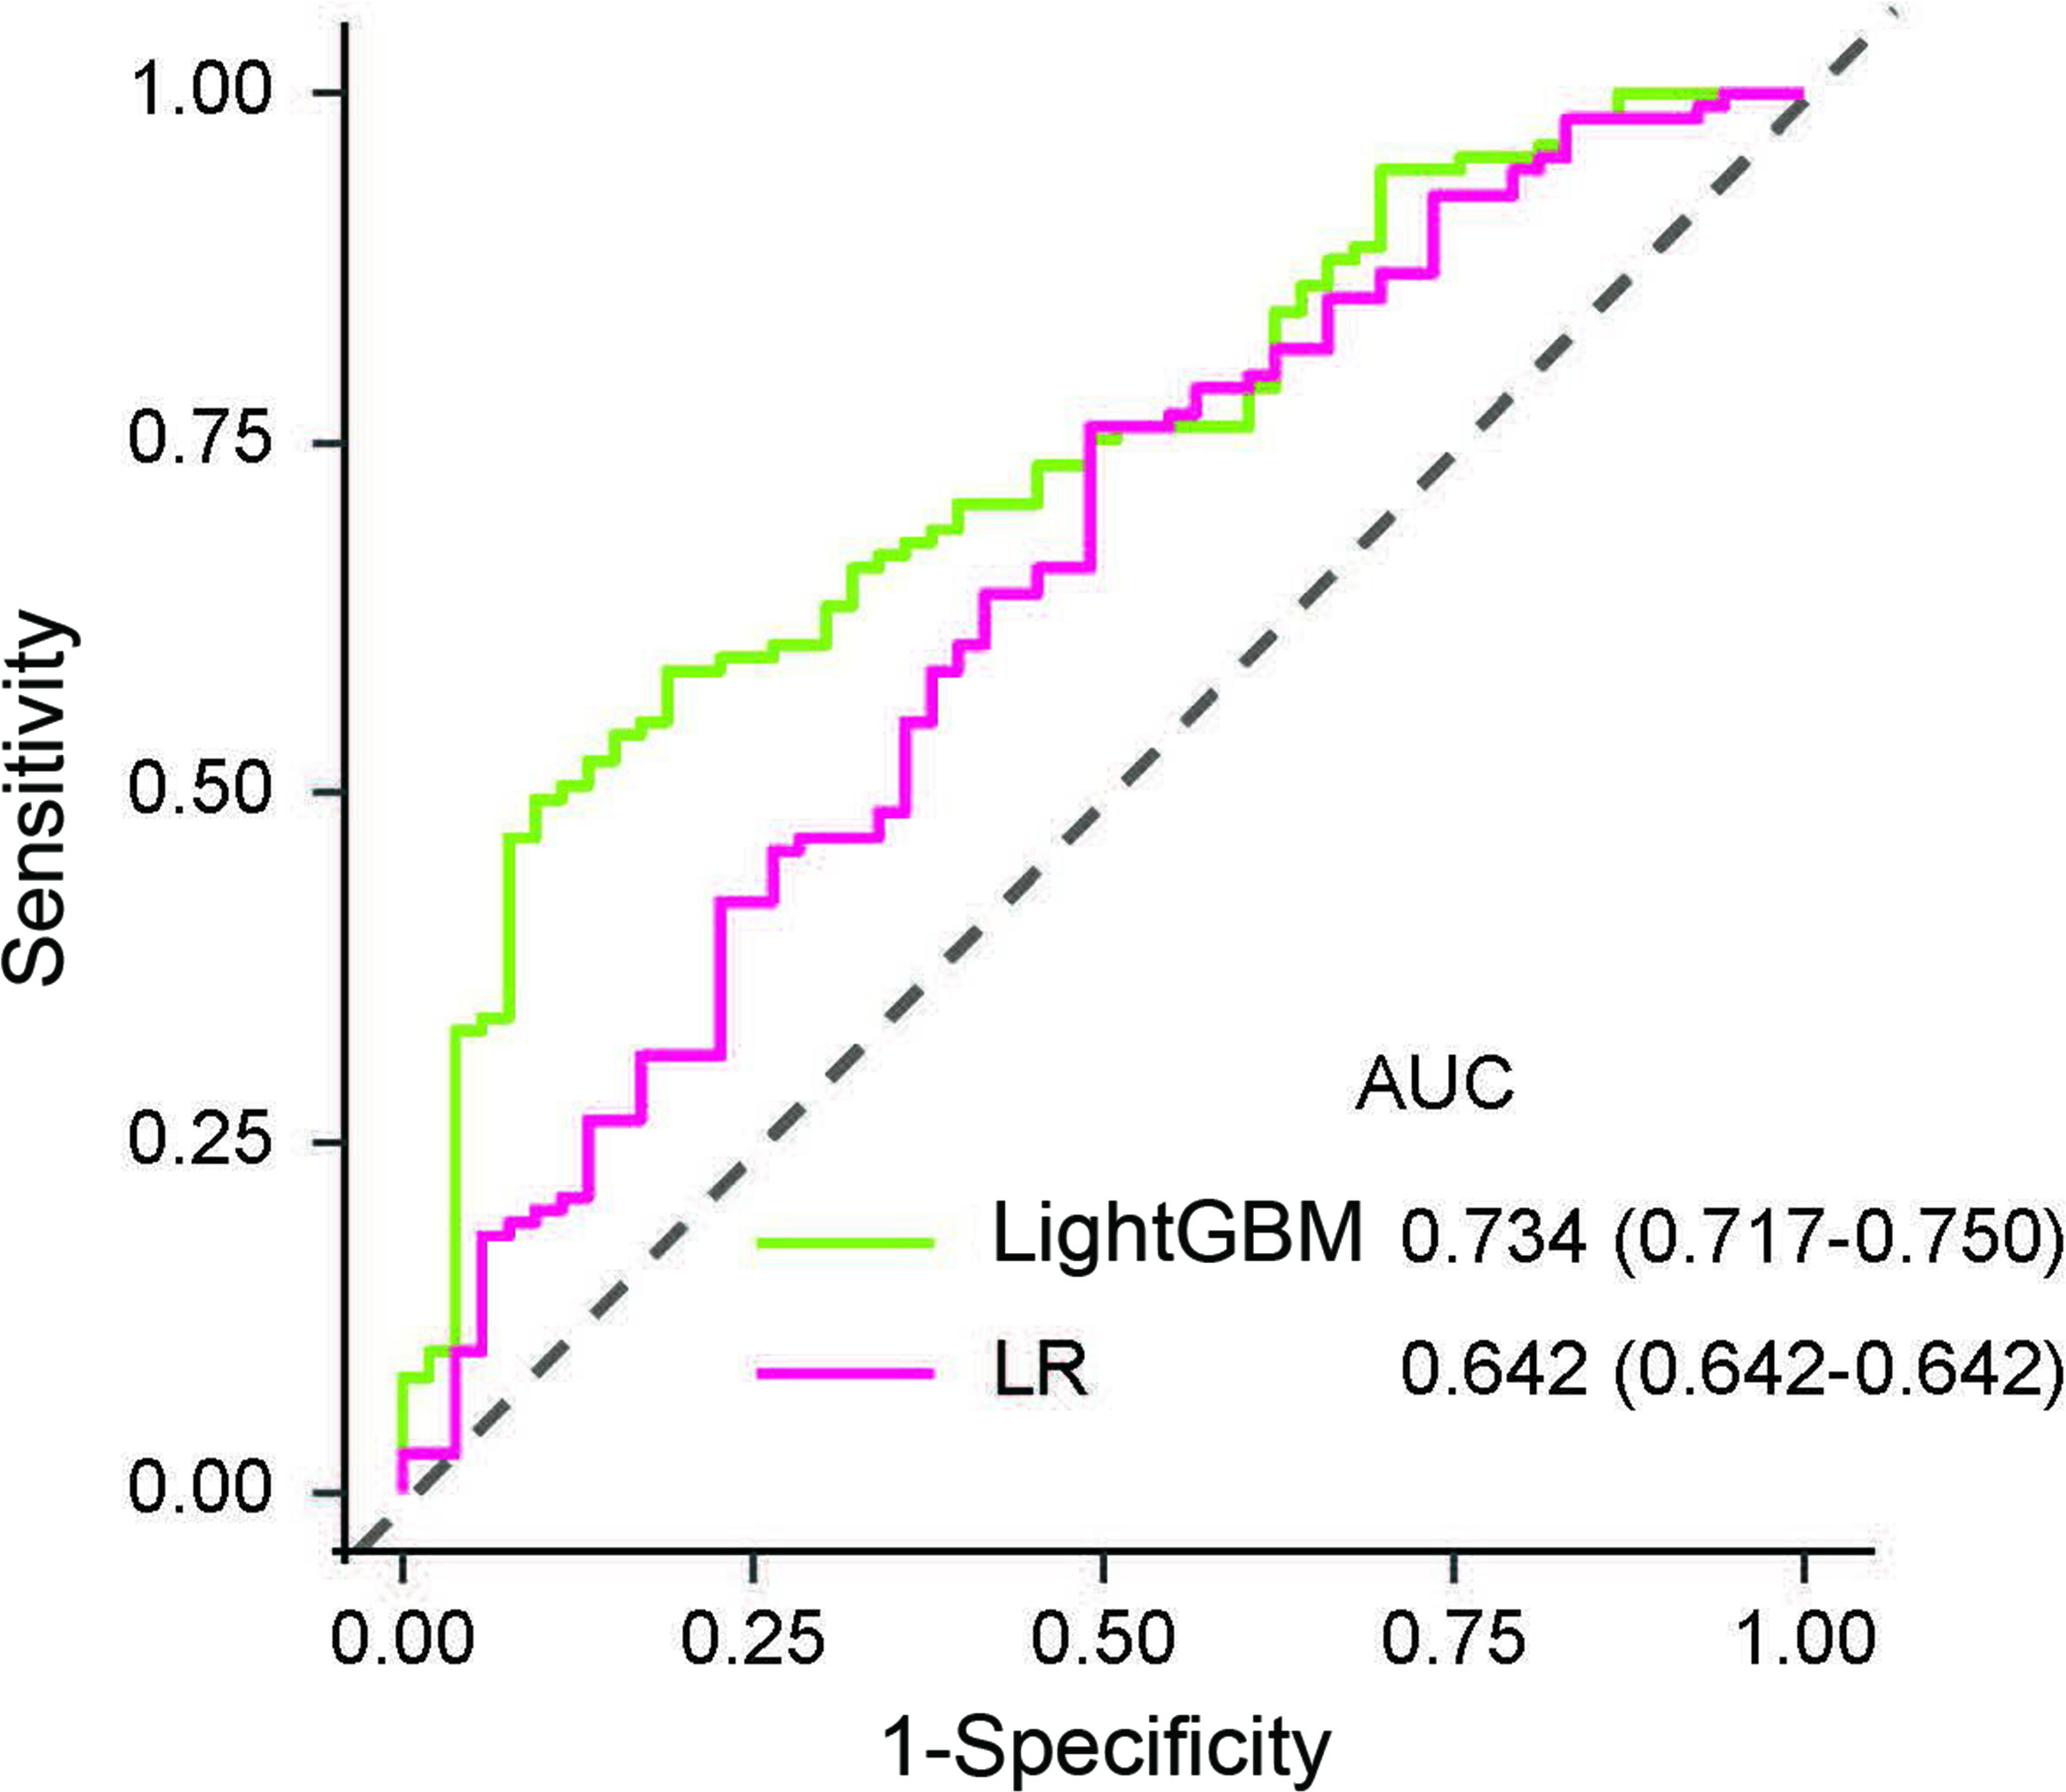 Fig. 3 
            Supervised prediction of bone mineral density (BMD) loss using patient- and operation-related variables. LightGBM showed a higher area under the receiver operating characteristic curve (AUC) than logistic regression (LR). The LightGBM classifier outperformed the LR model with a mean AUC of 0.734.
          